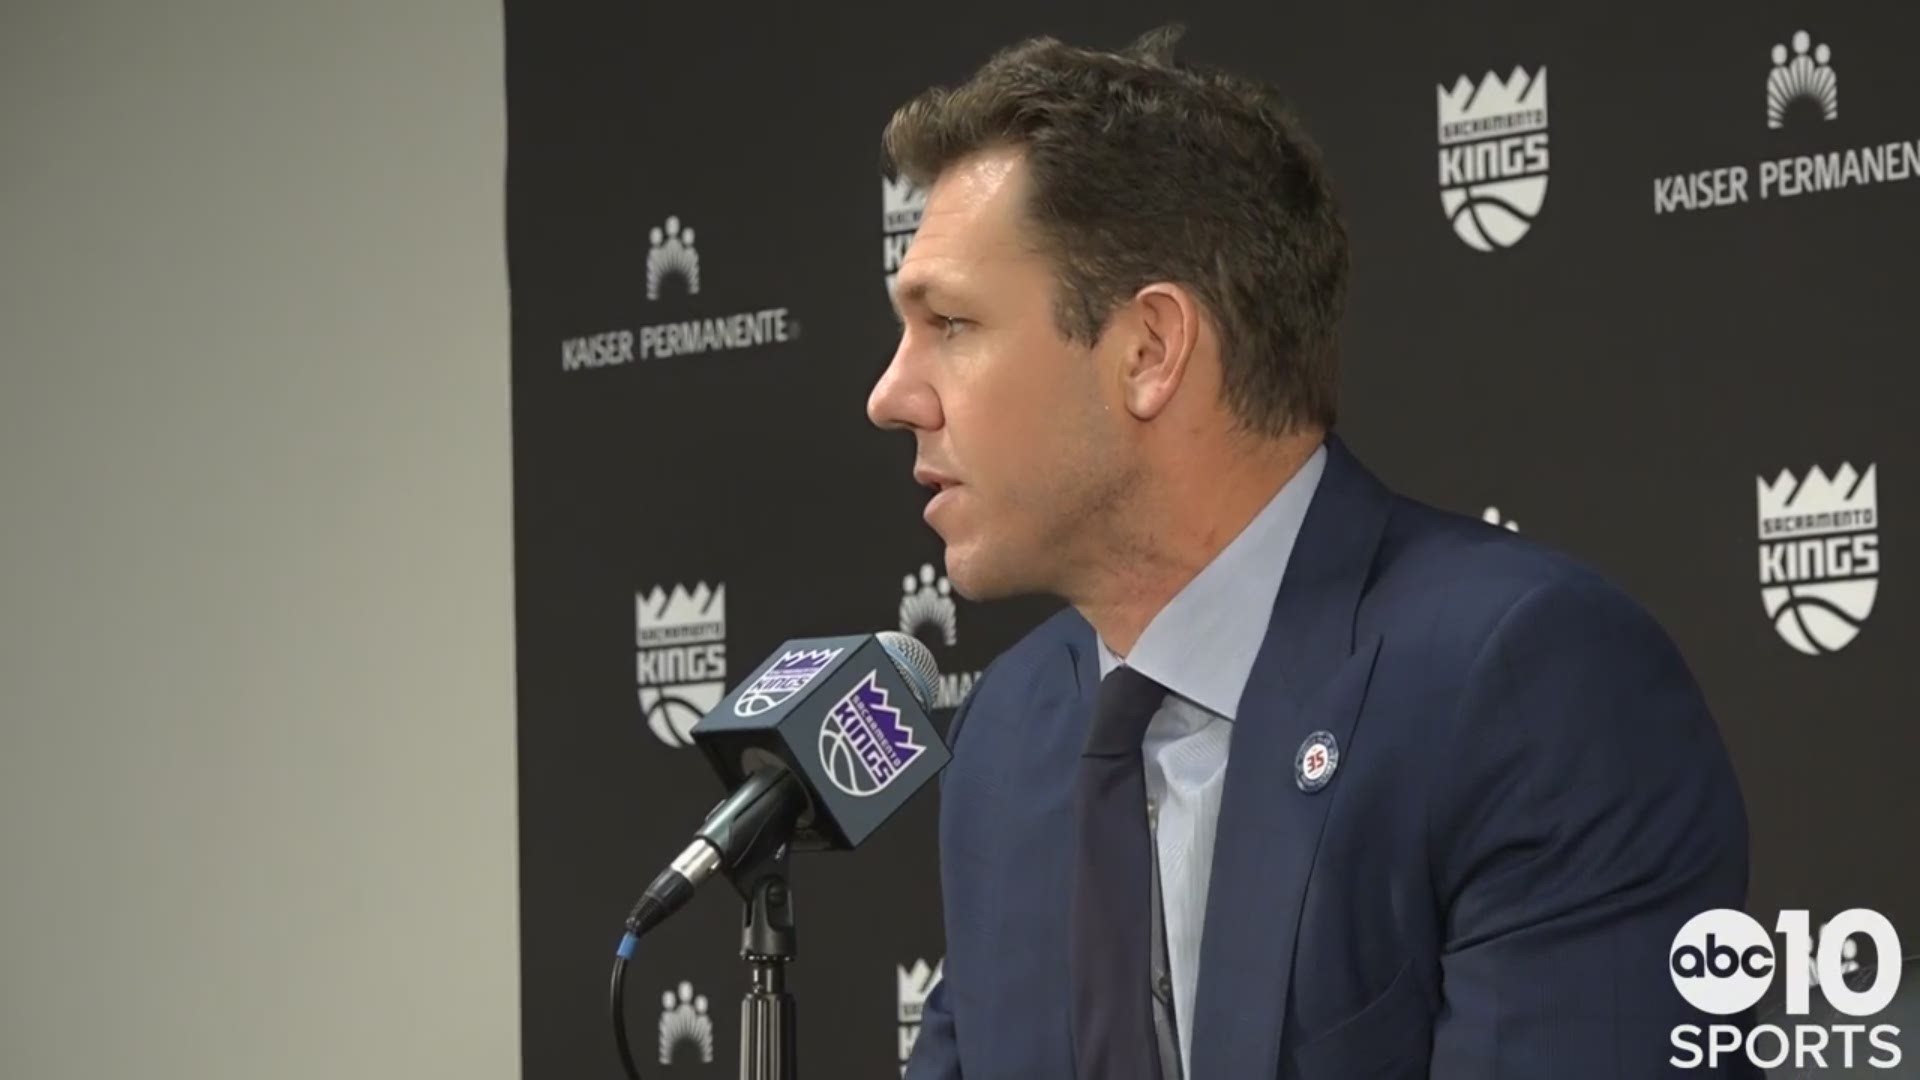 Sacramento Kings coach Luke Walton discusses Thursday night's win over the Phoenix Suns and the improvements he witnessed on the defensive end.